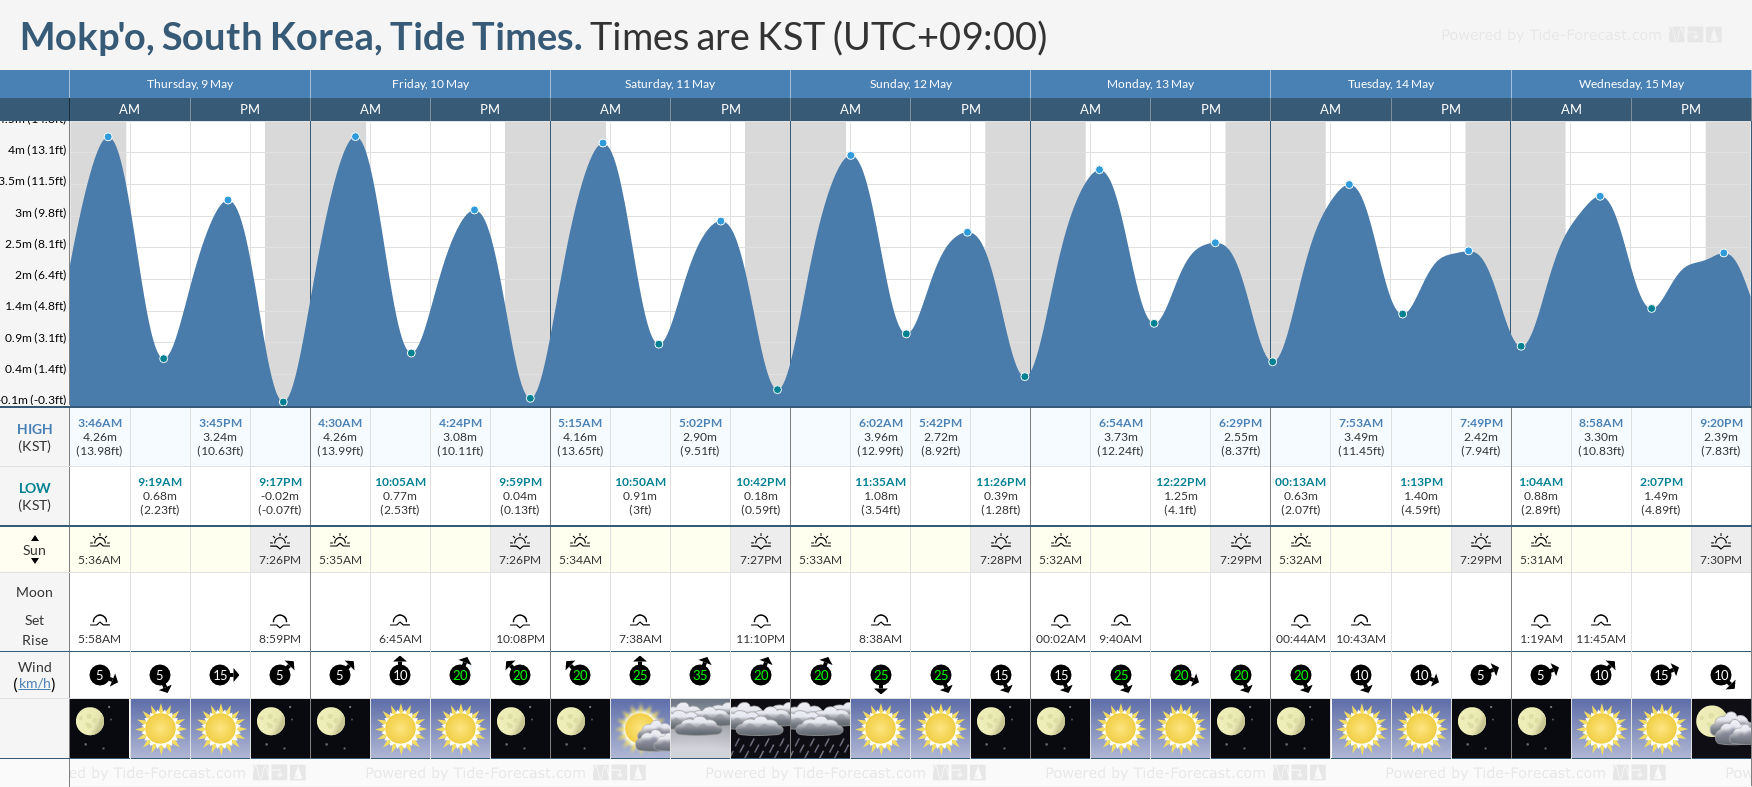 Mokp'o, South Korea Tide Chart including high and low tide tide times for the next 7 days